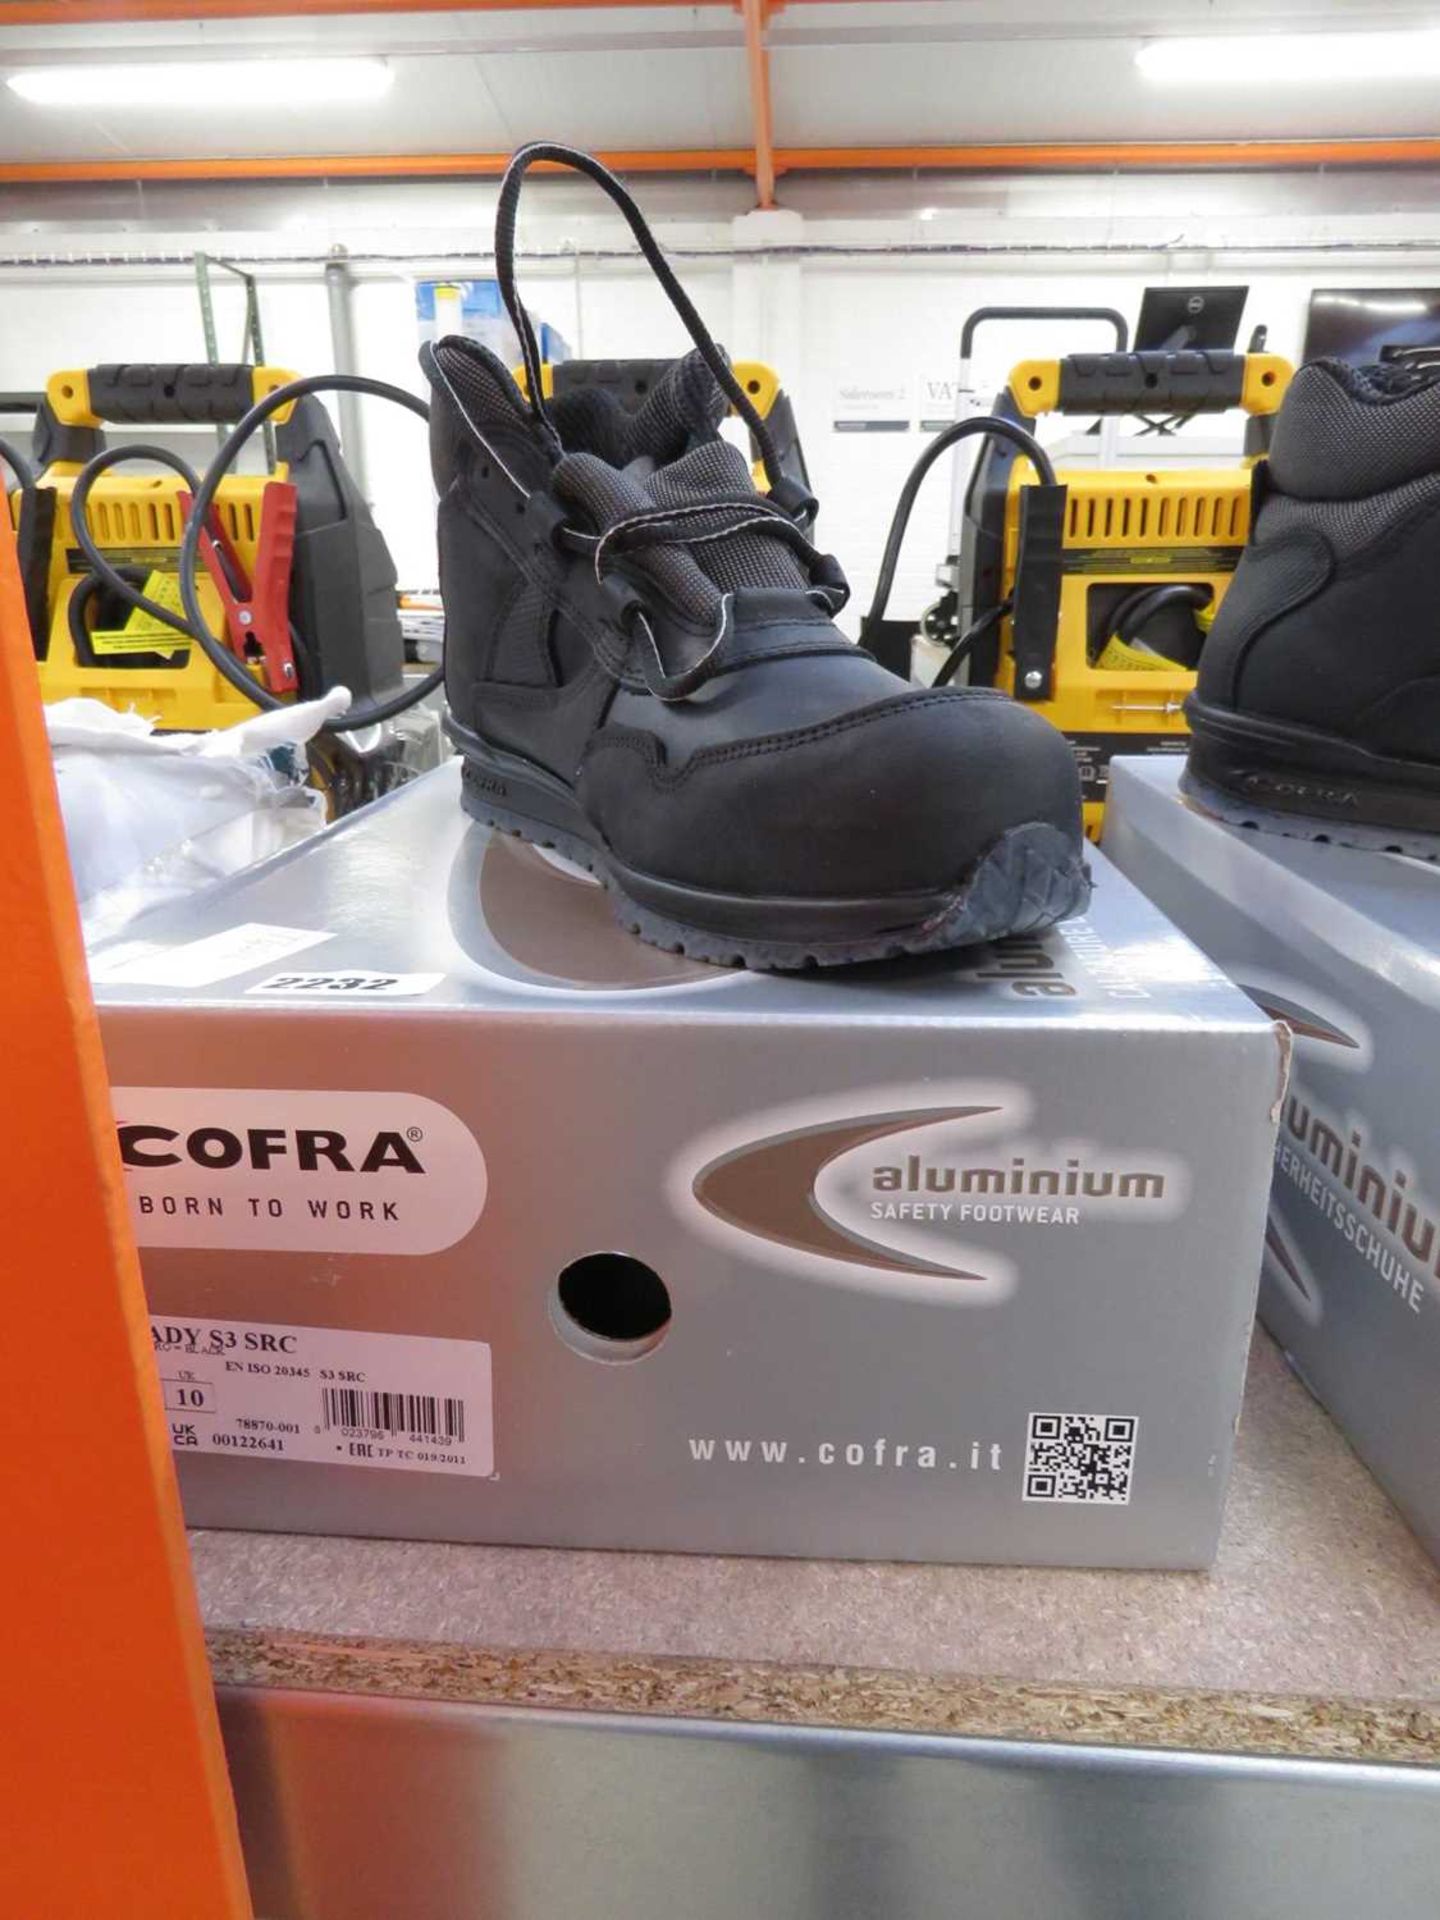 Pair of Cofra black steel toe safety boots, size UK 10